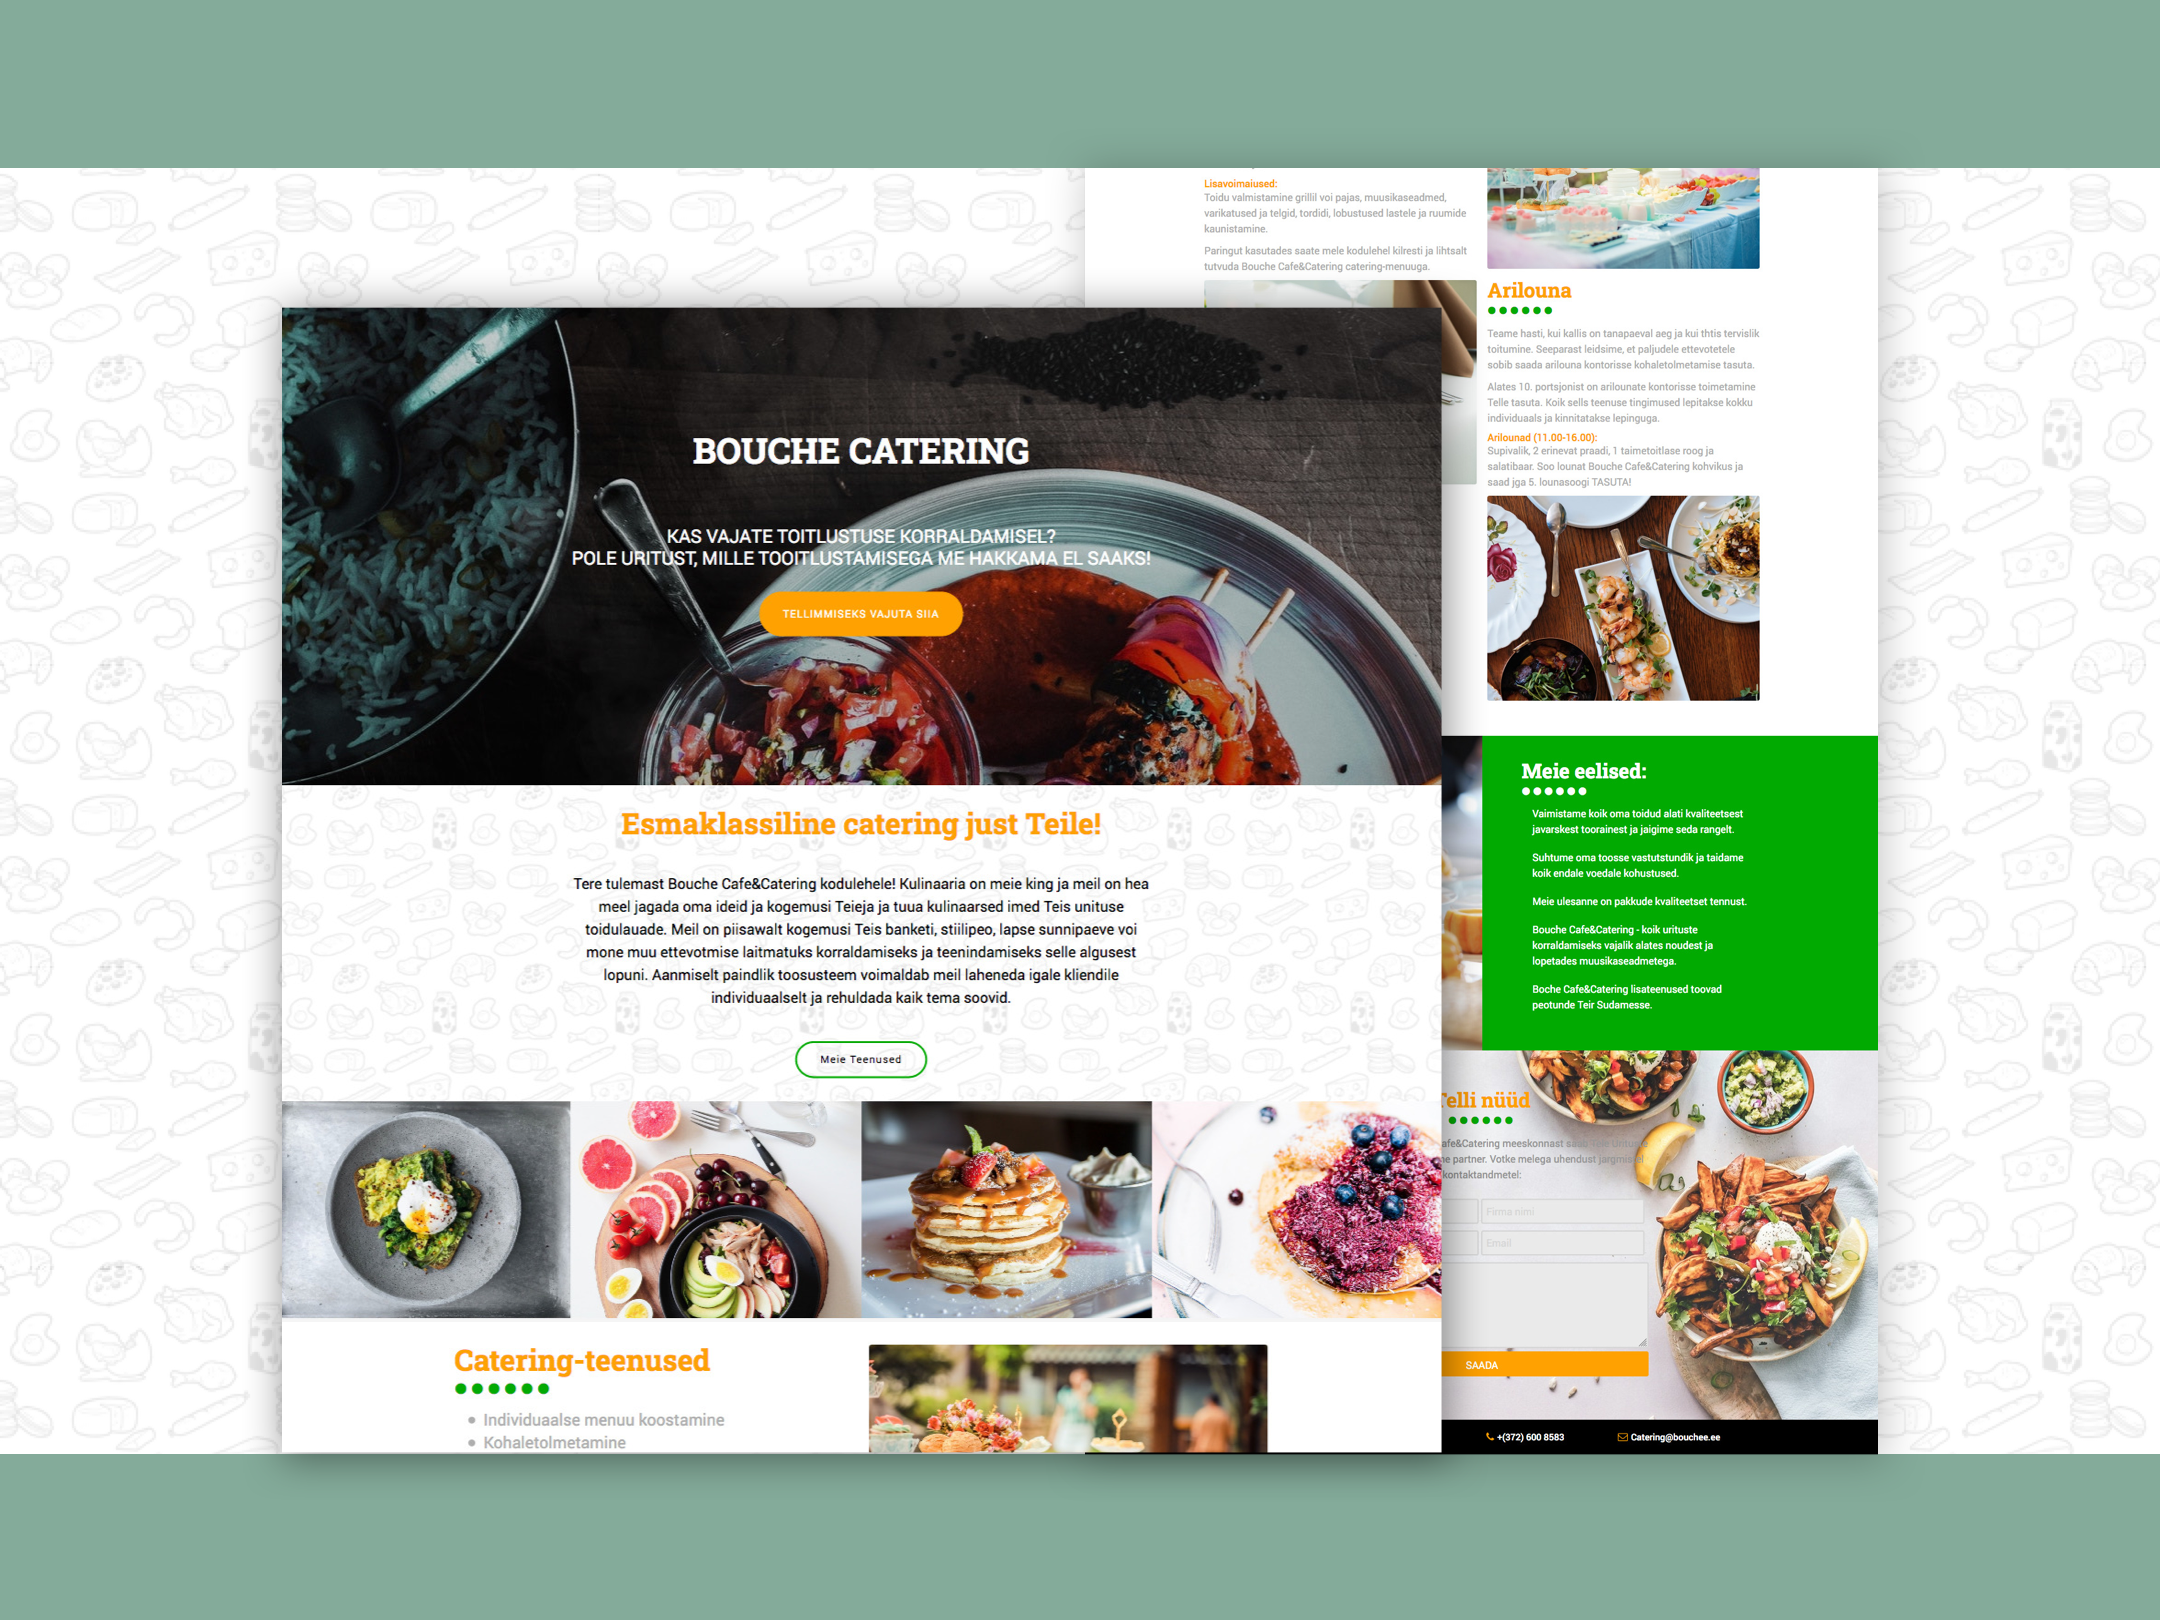 Restaurant website with text and food photos made in HTML, SASS, and flexbox by Katherine Delorme